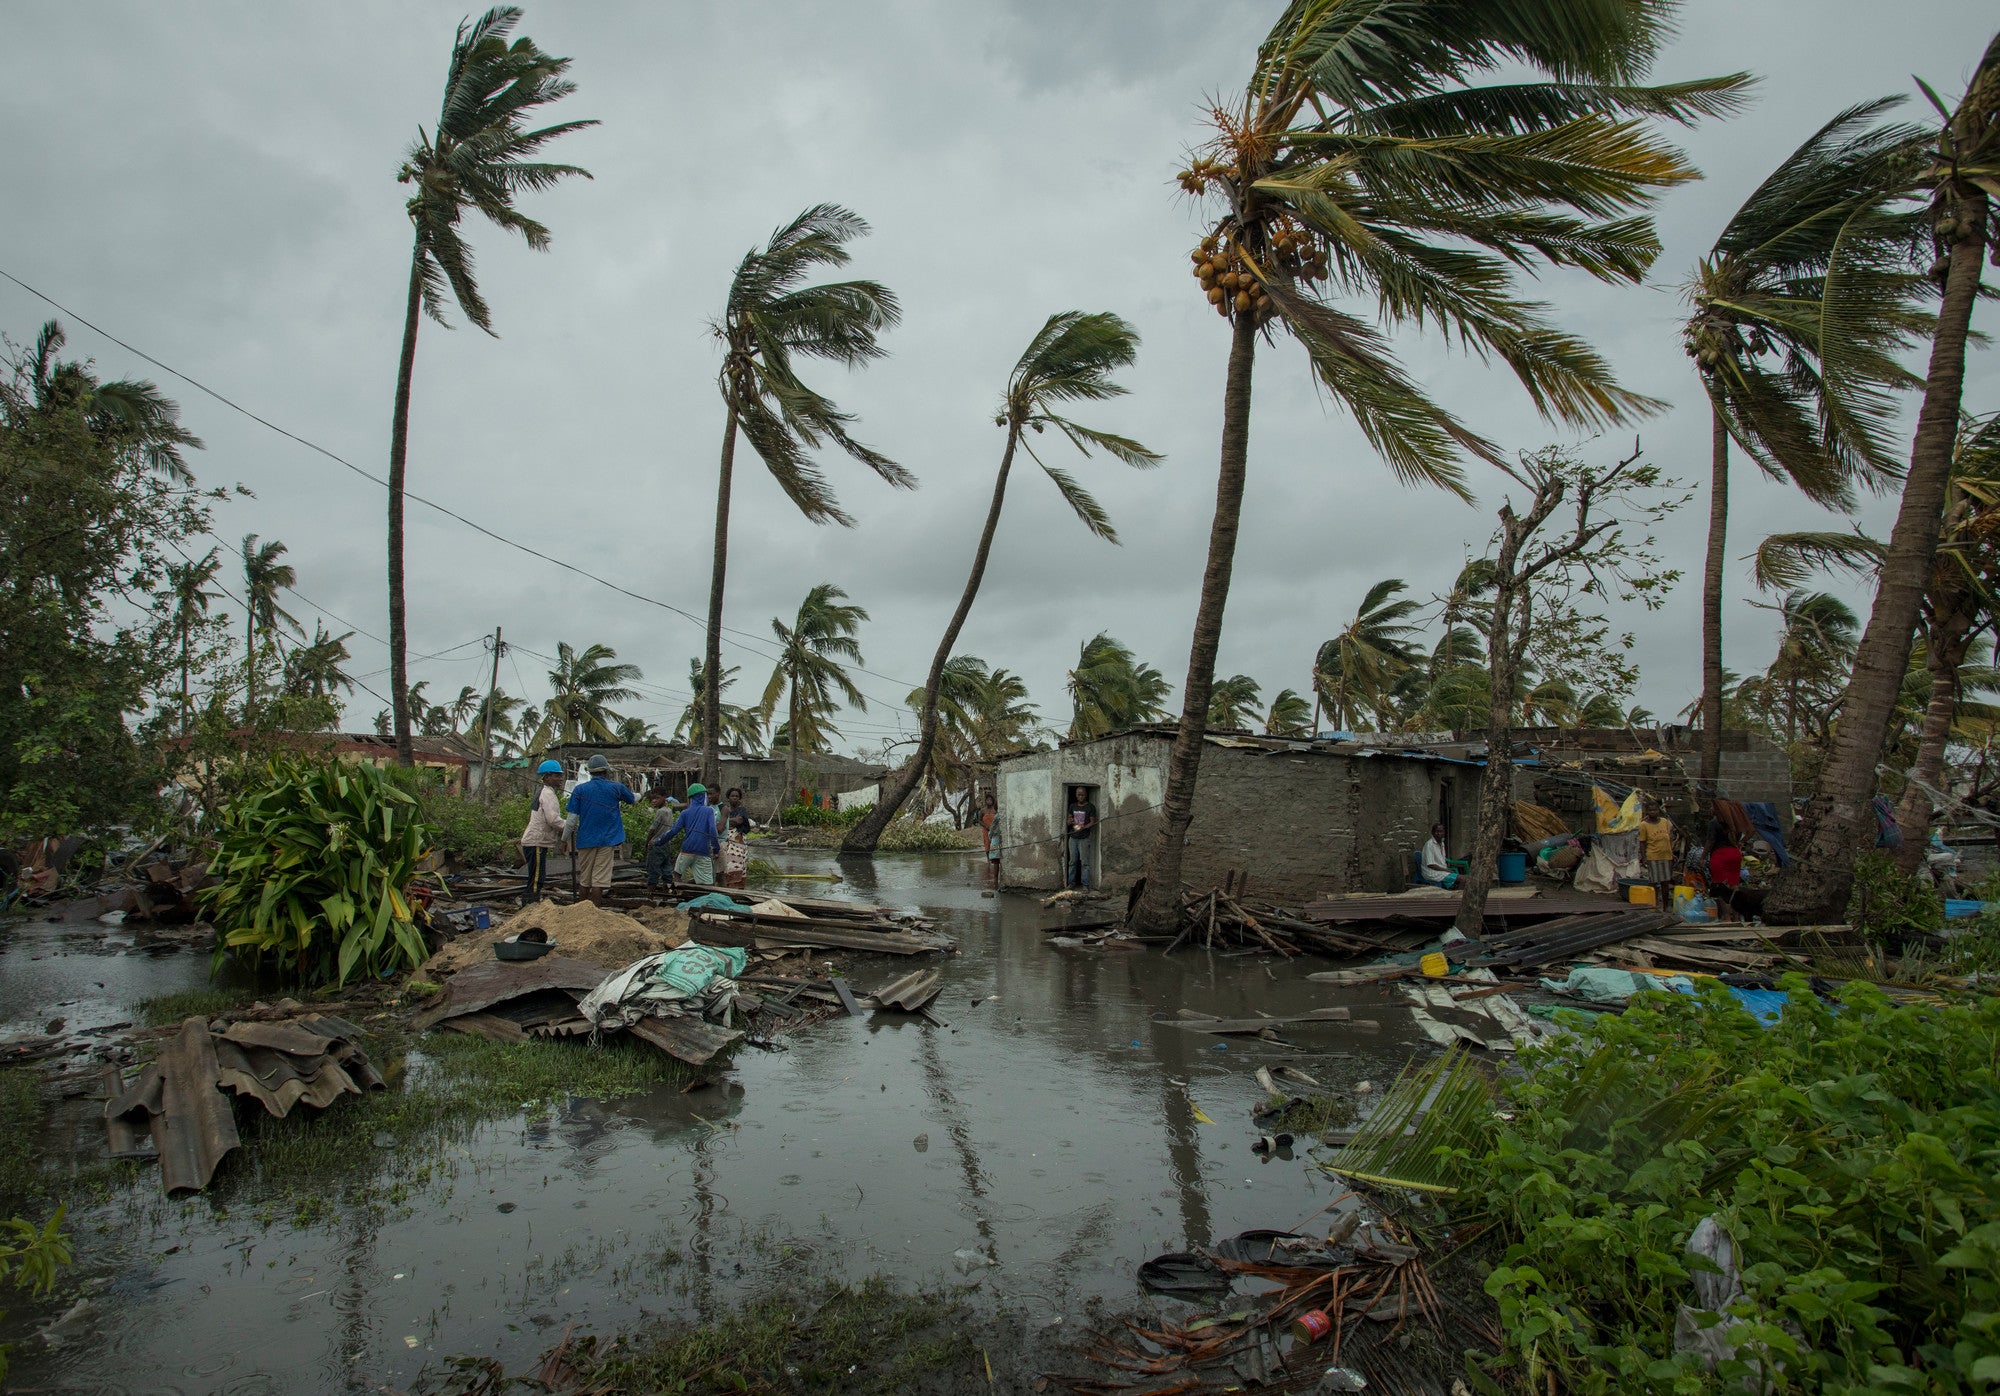 The devastating effects of Cyclone Idai, a category 4 cyclone that hit Malawi, Mozambique and Zimbabwe two weeks ago, are still being felt. In the city of Beira, in central Mozambique, Idai knocked out power across the province. Photo: Josh Estey/CARE